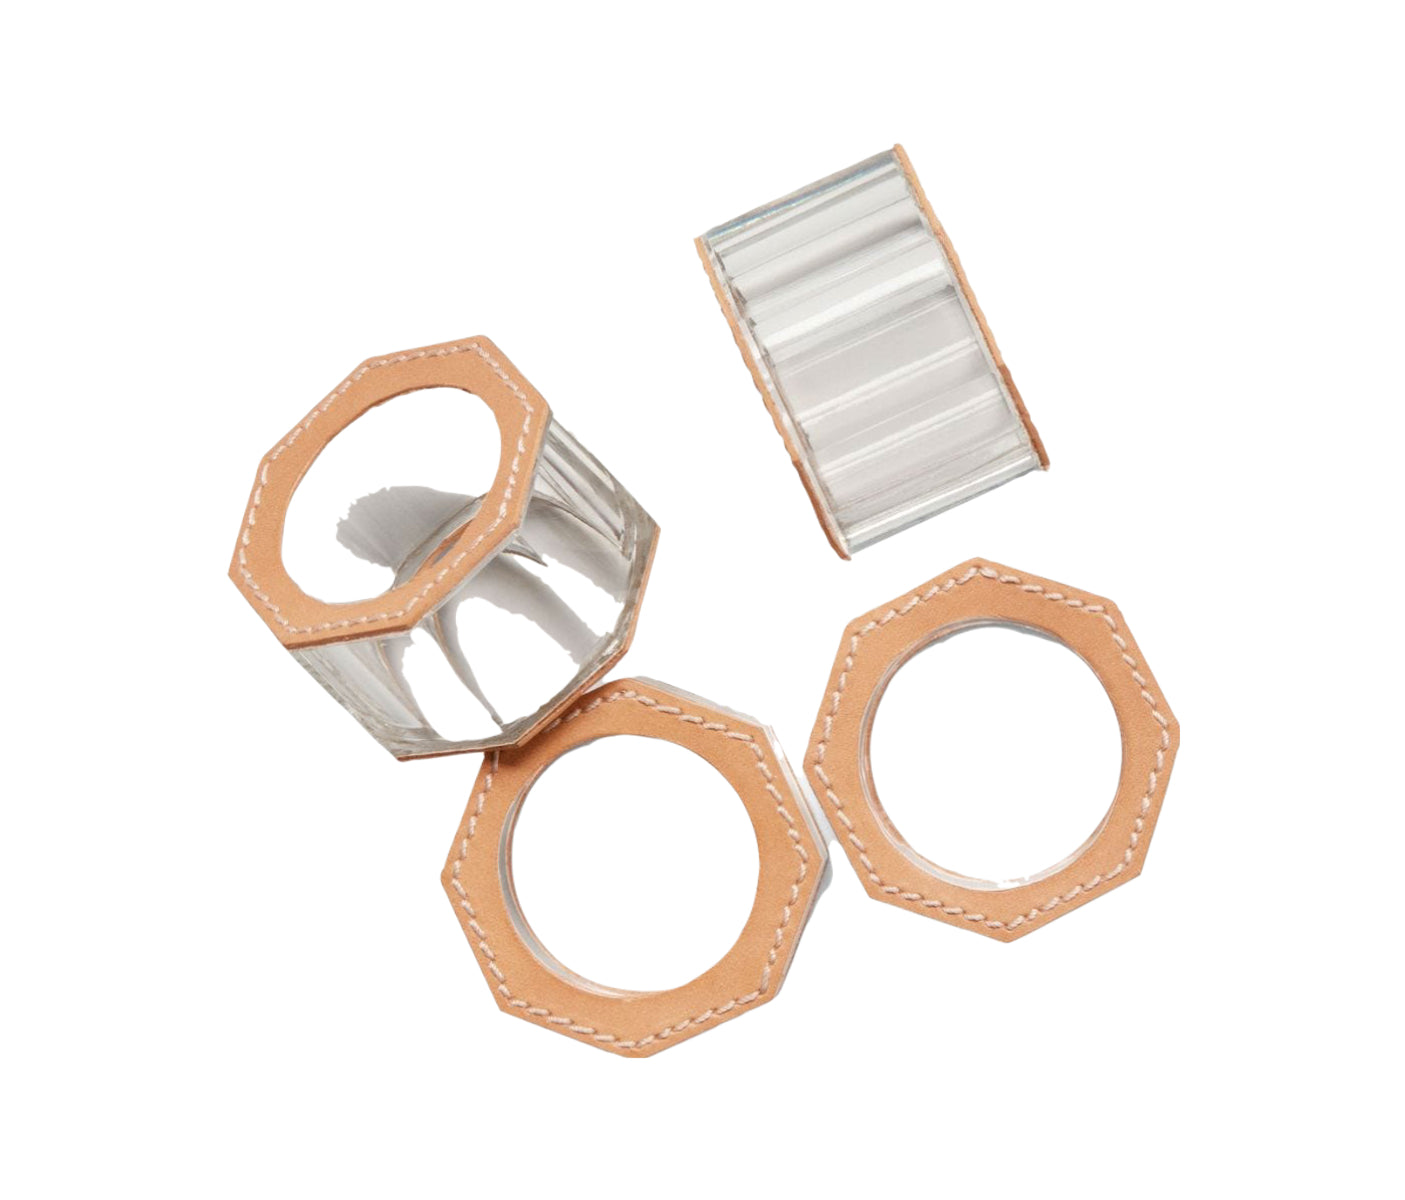 Arthur Napkin Ring - Aged Camel Leather / Clear Glass